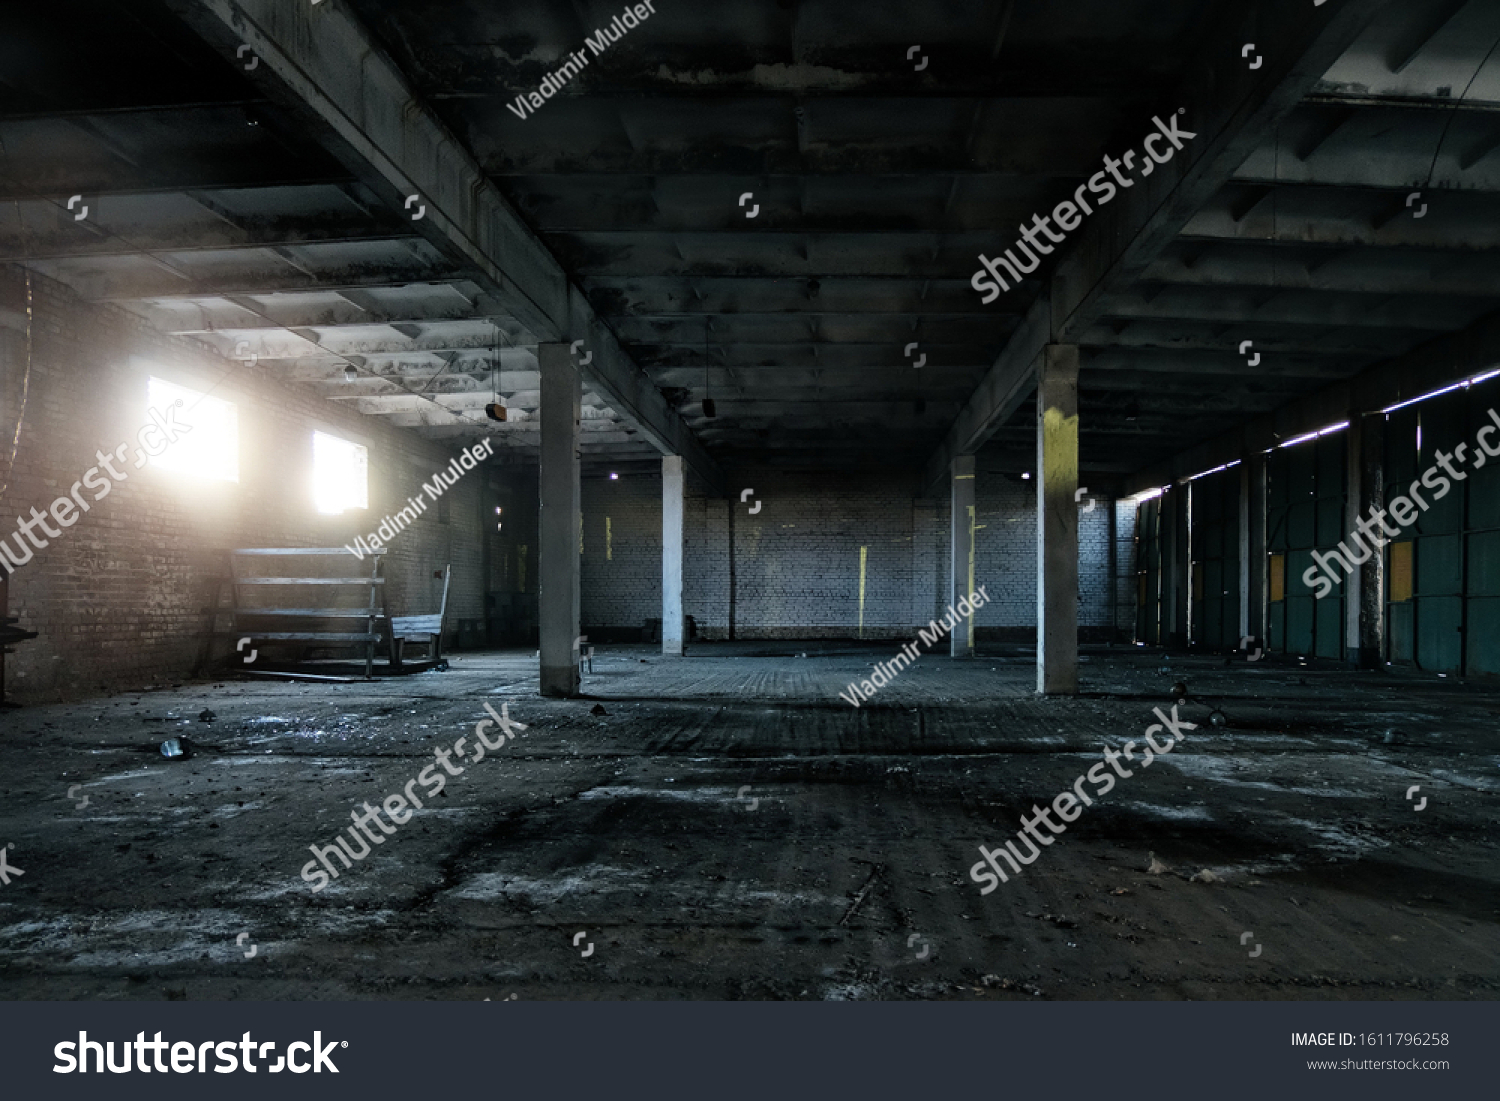 Old abandoned industrial building interior #1611796258